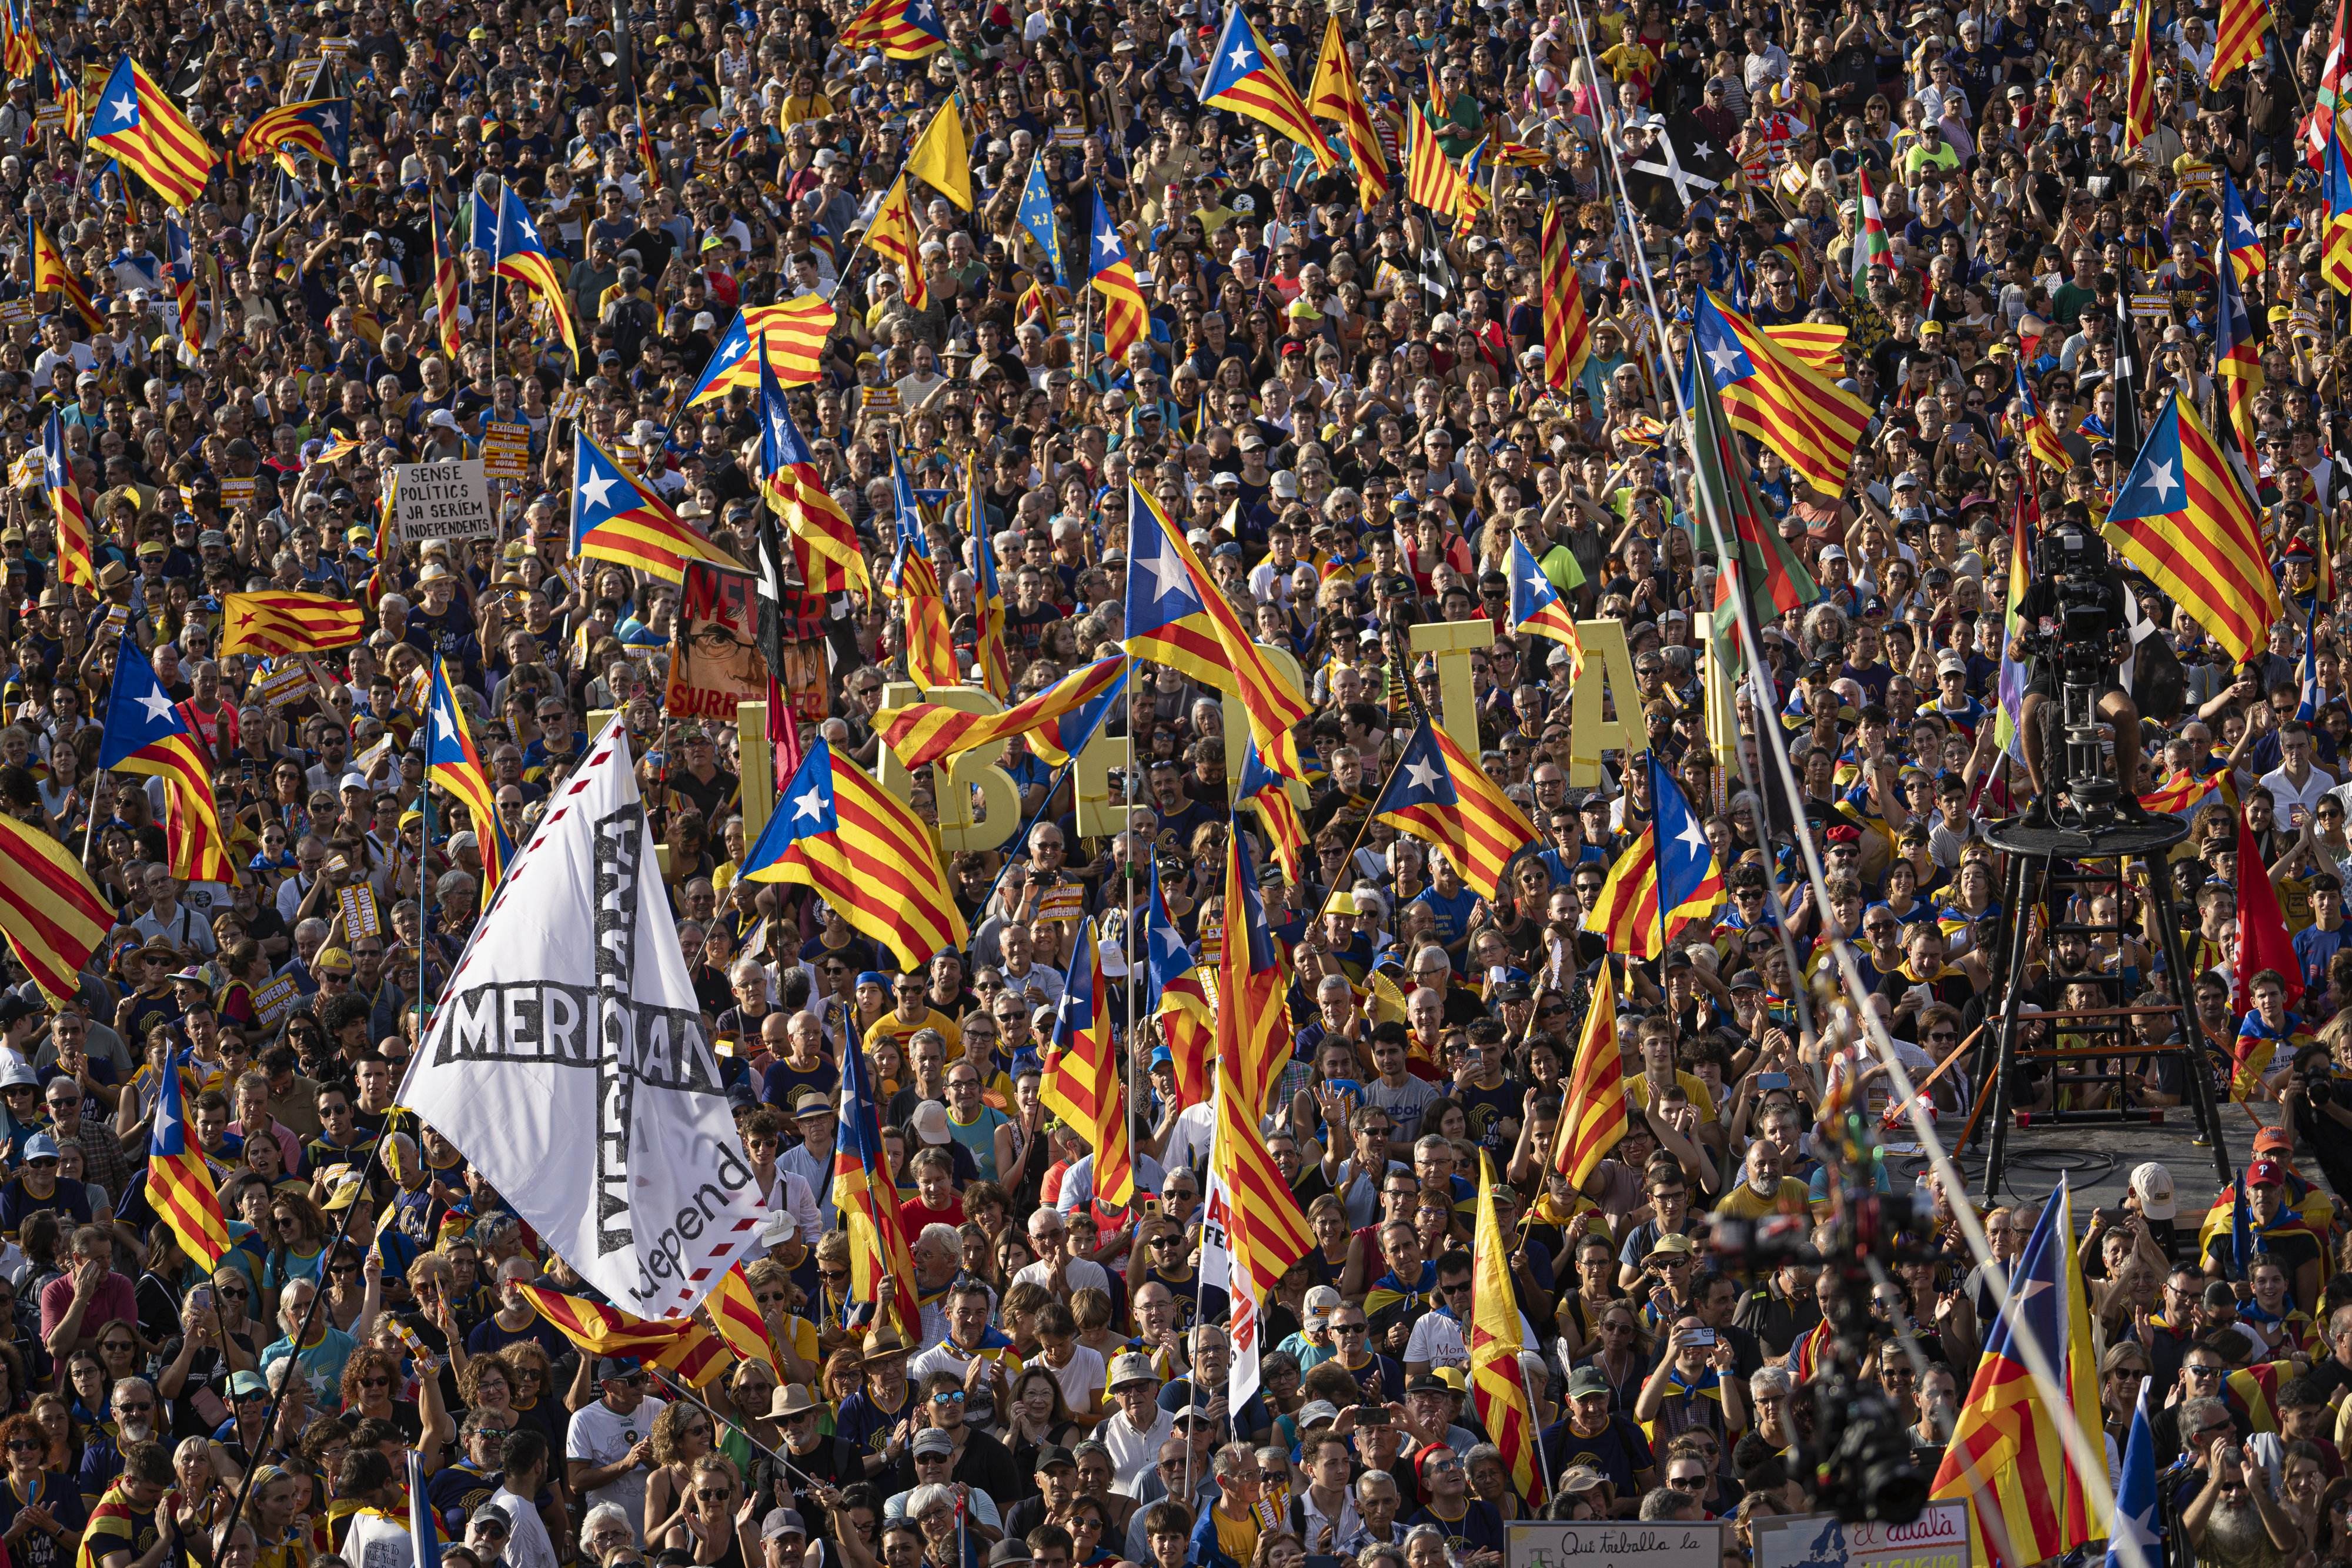 Catalonia's boomers, the most politicised and pro-independence generation, says CEO study